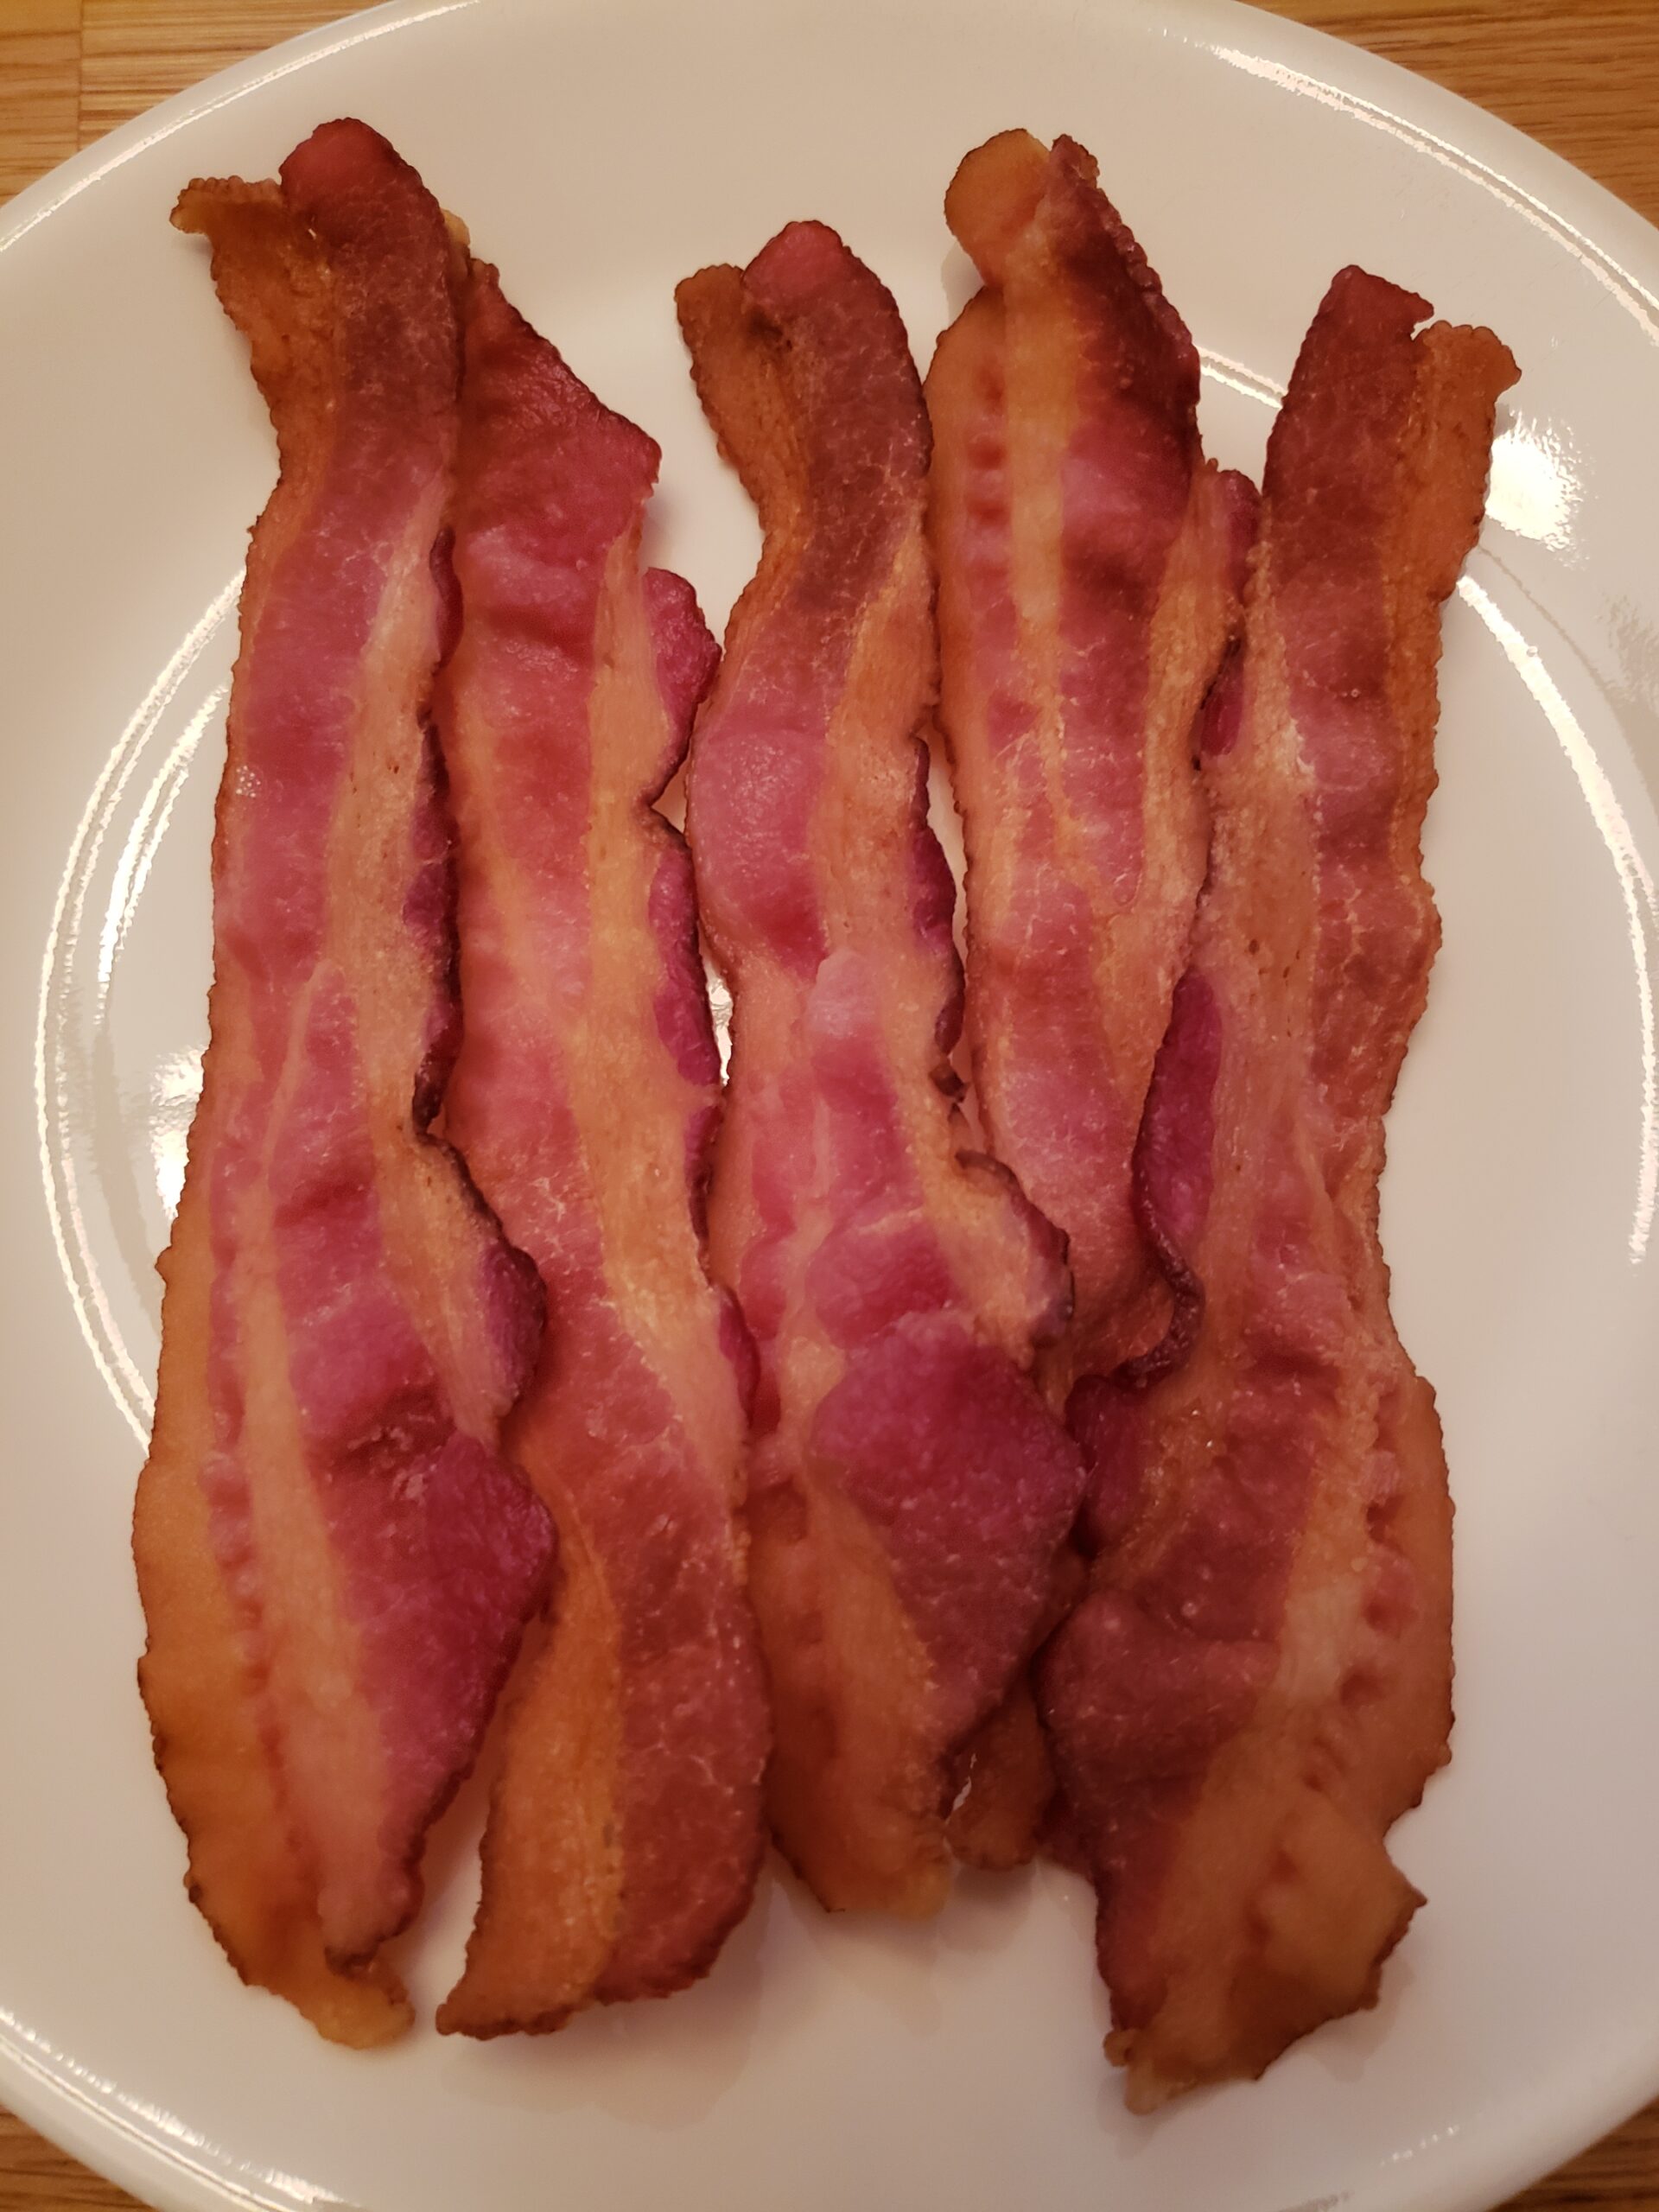 crisp slices of bacon on a white plate.